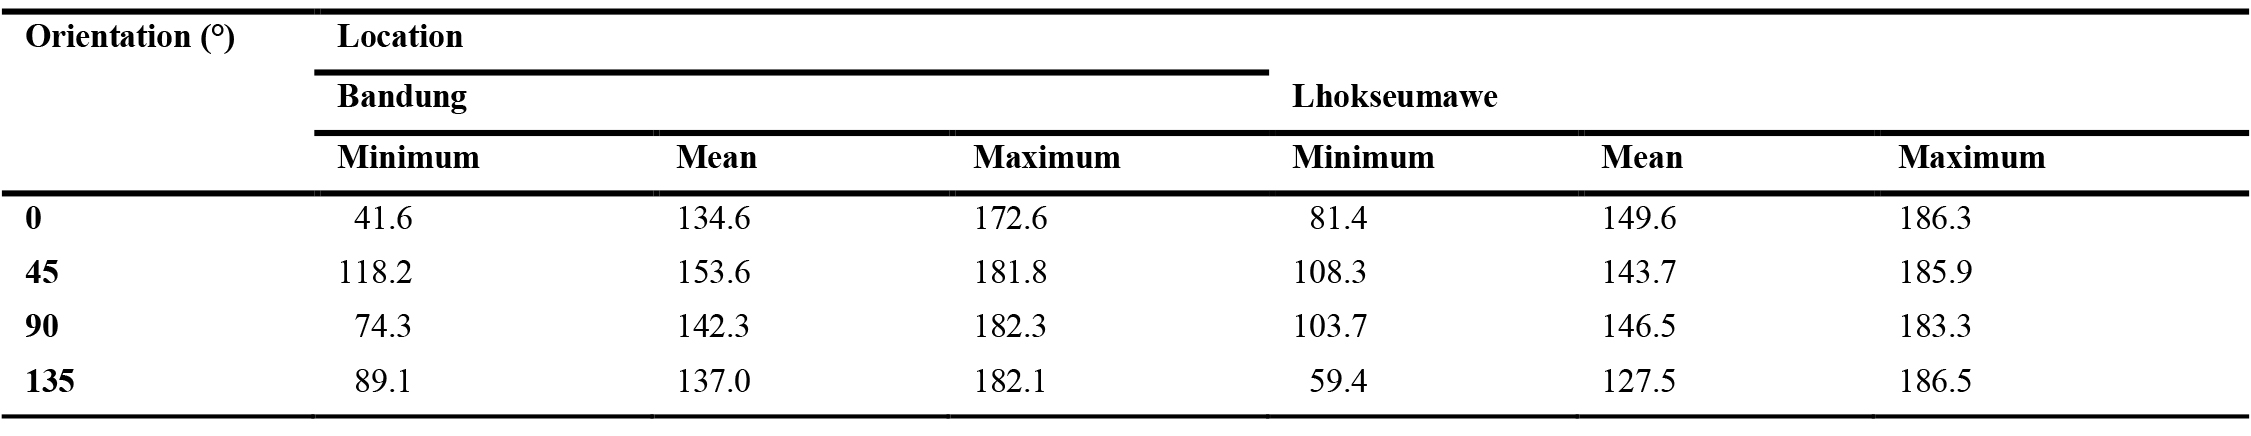 Minimum, mean and maximum Y values (%) at each orientation in Bandung and Lhokseumawe.